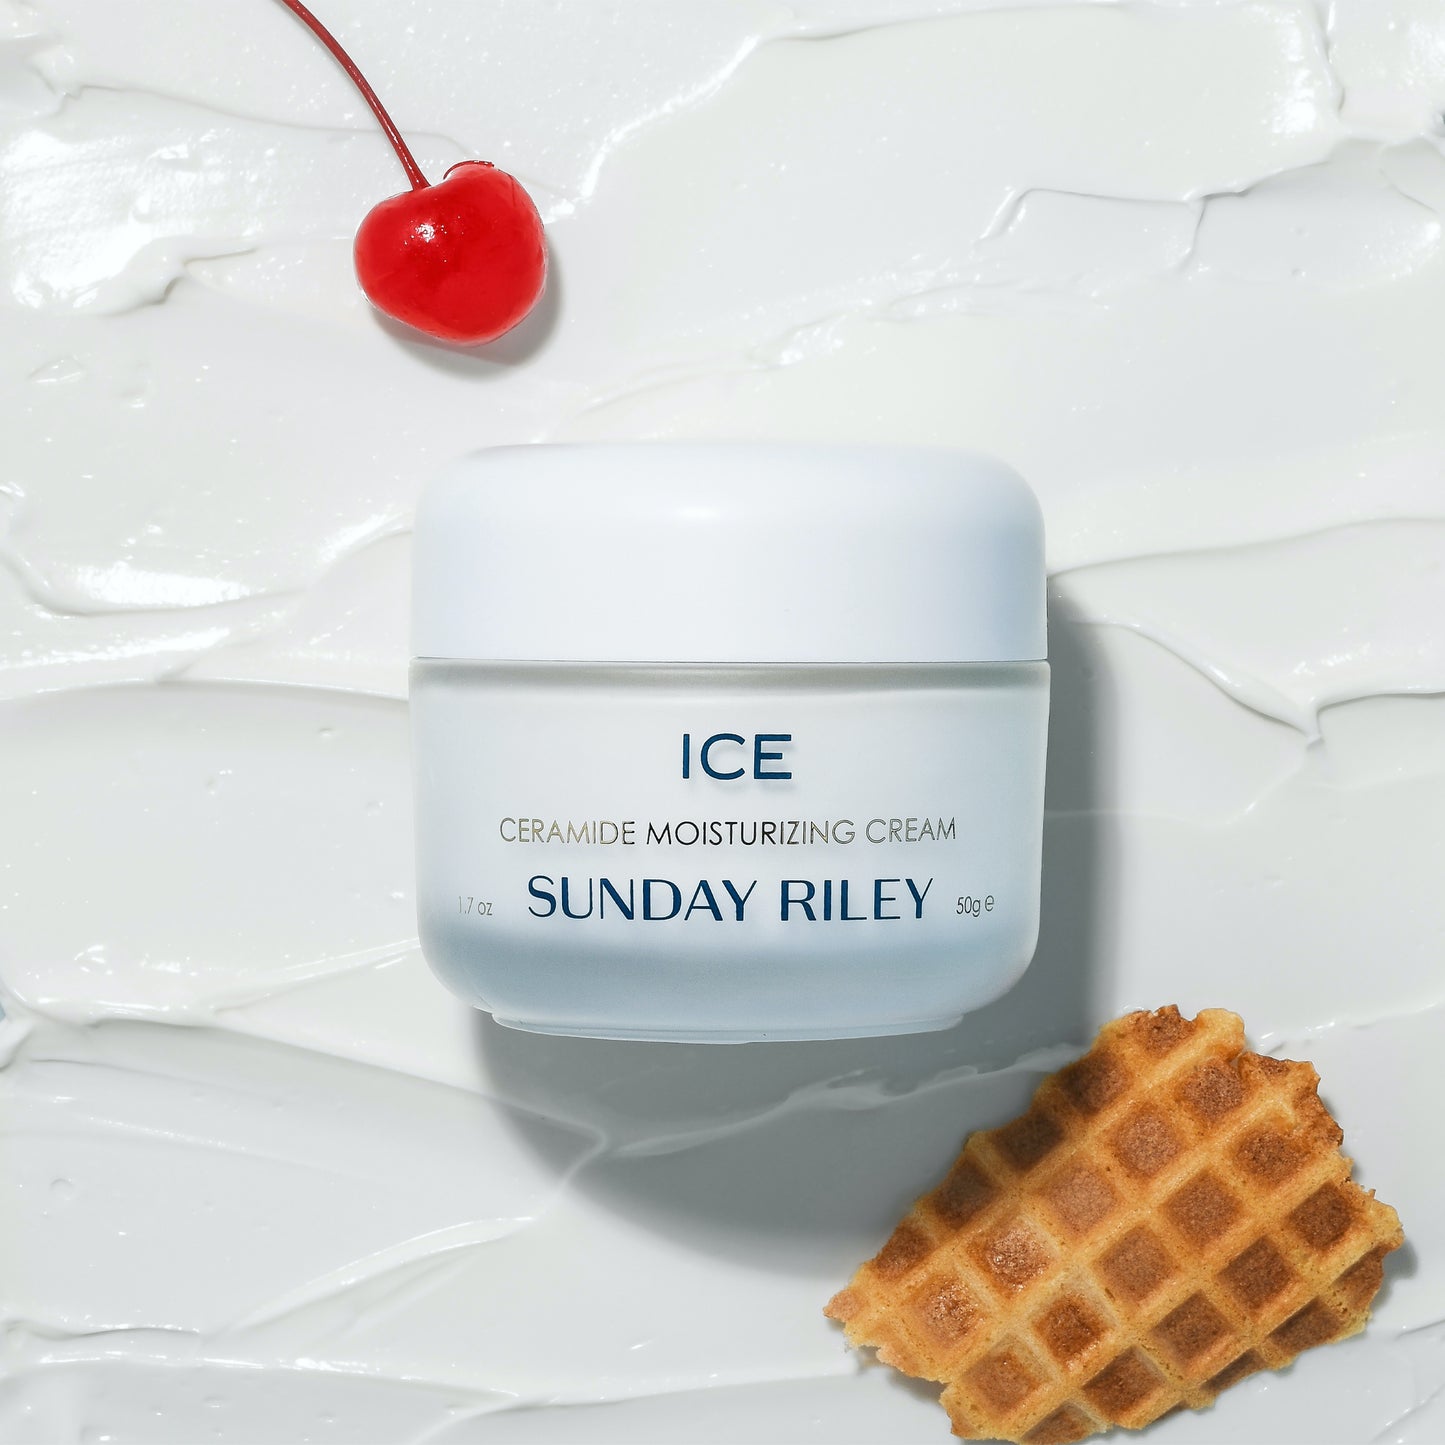 ICE Ceramide Moisturizing Cream laying over the goop with a chery on top left and a piece of ice cream cone on the botton right